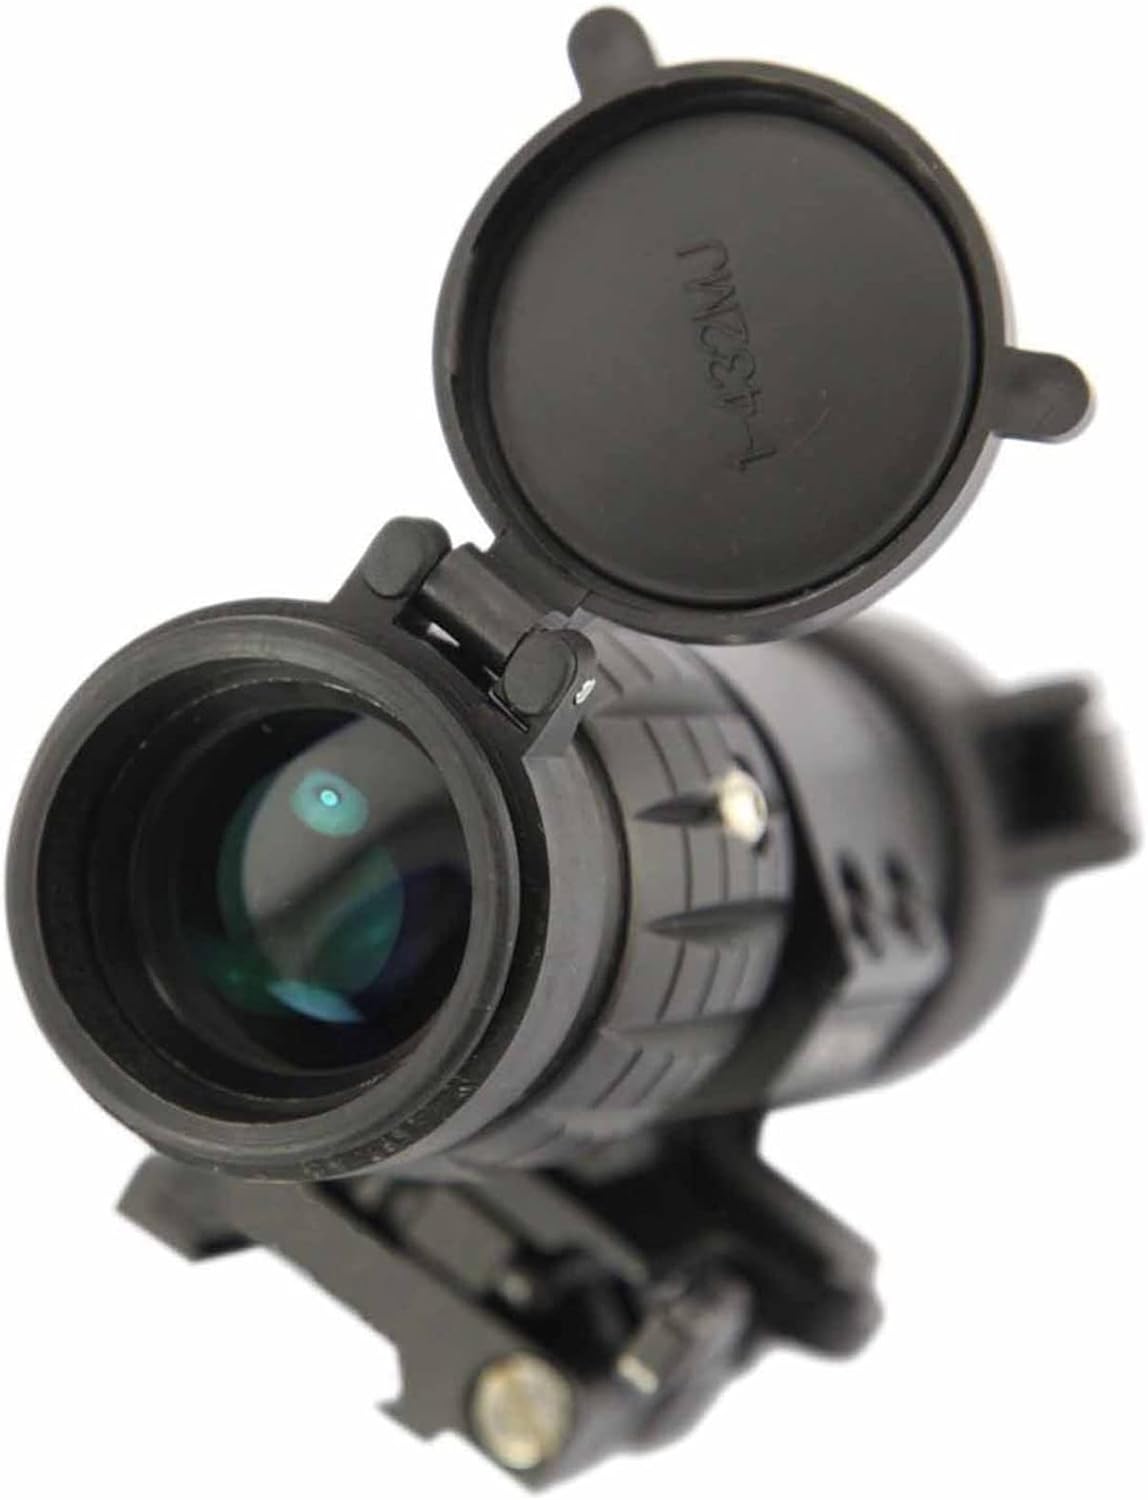 TRIMEX MAGNIFIER SCOPE X3 WITH FLIP-UP MOUNT